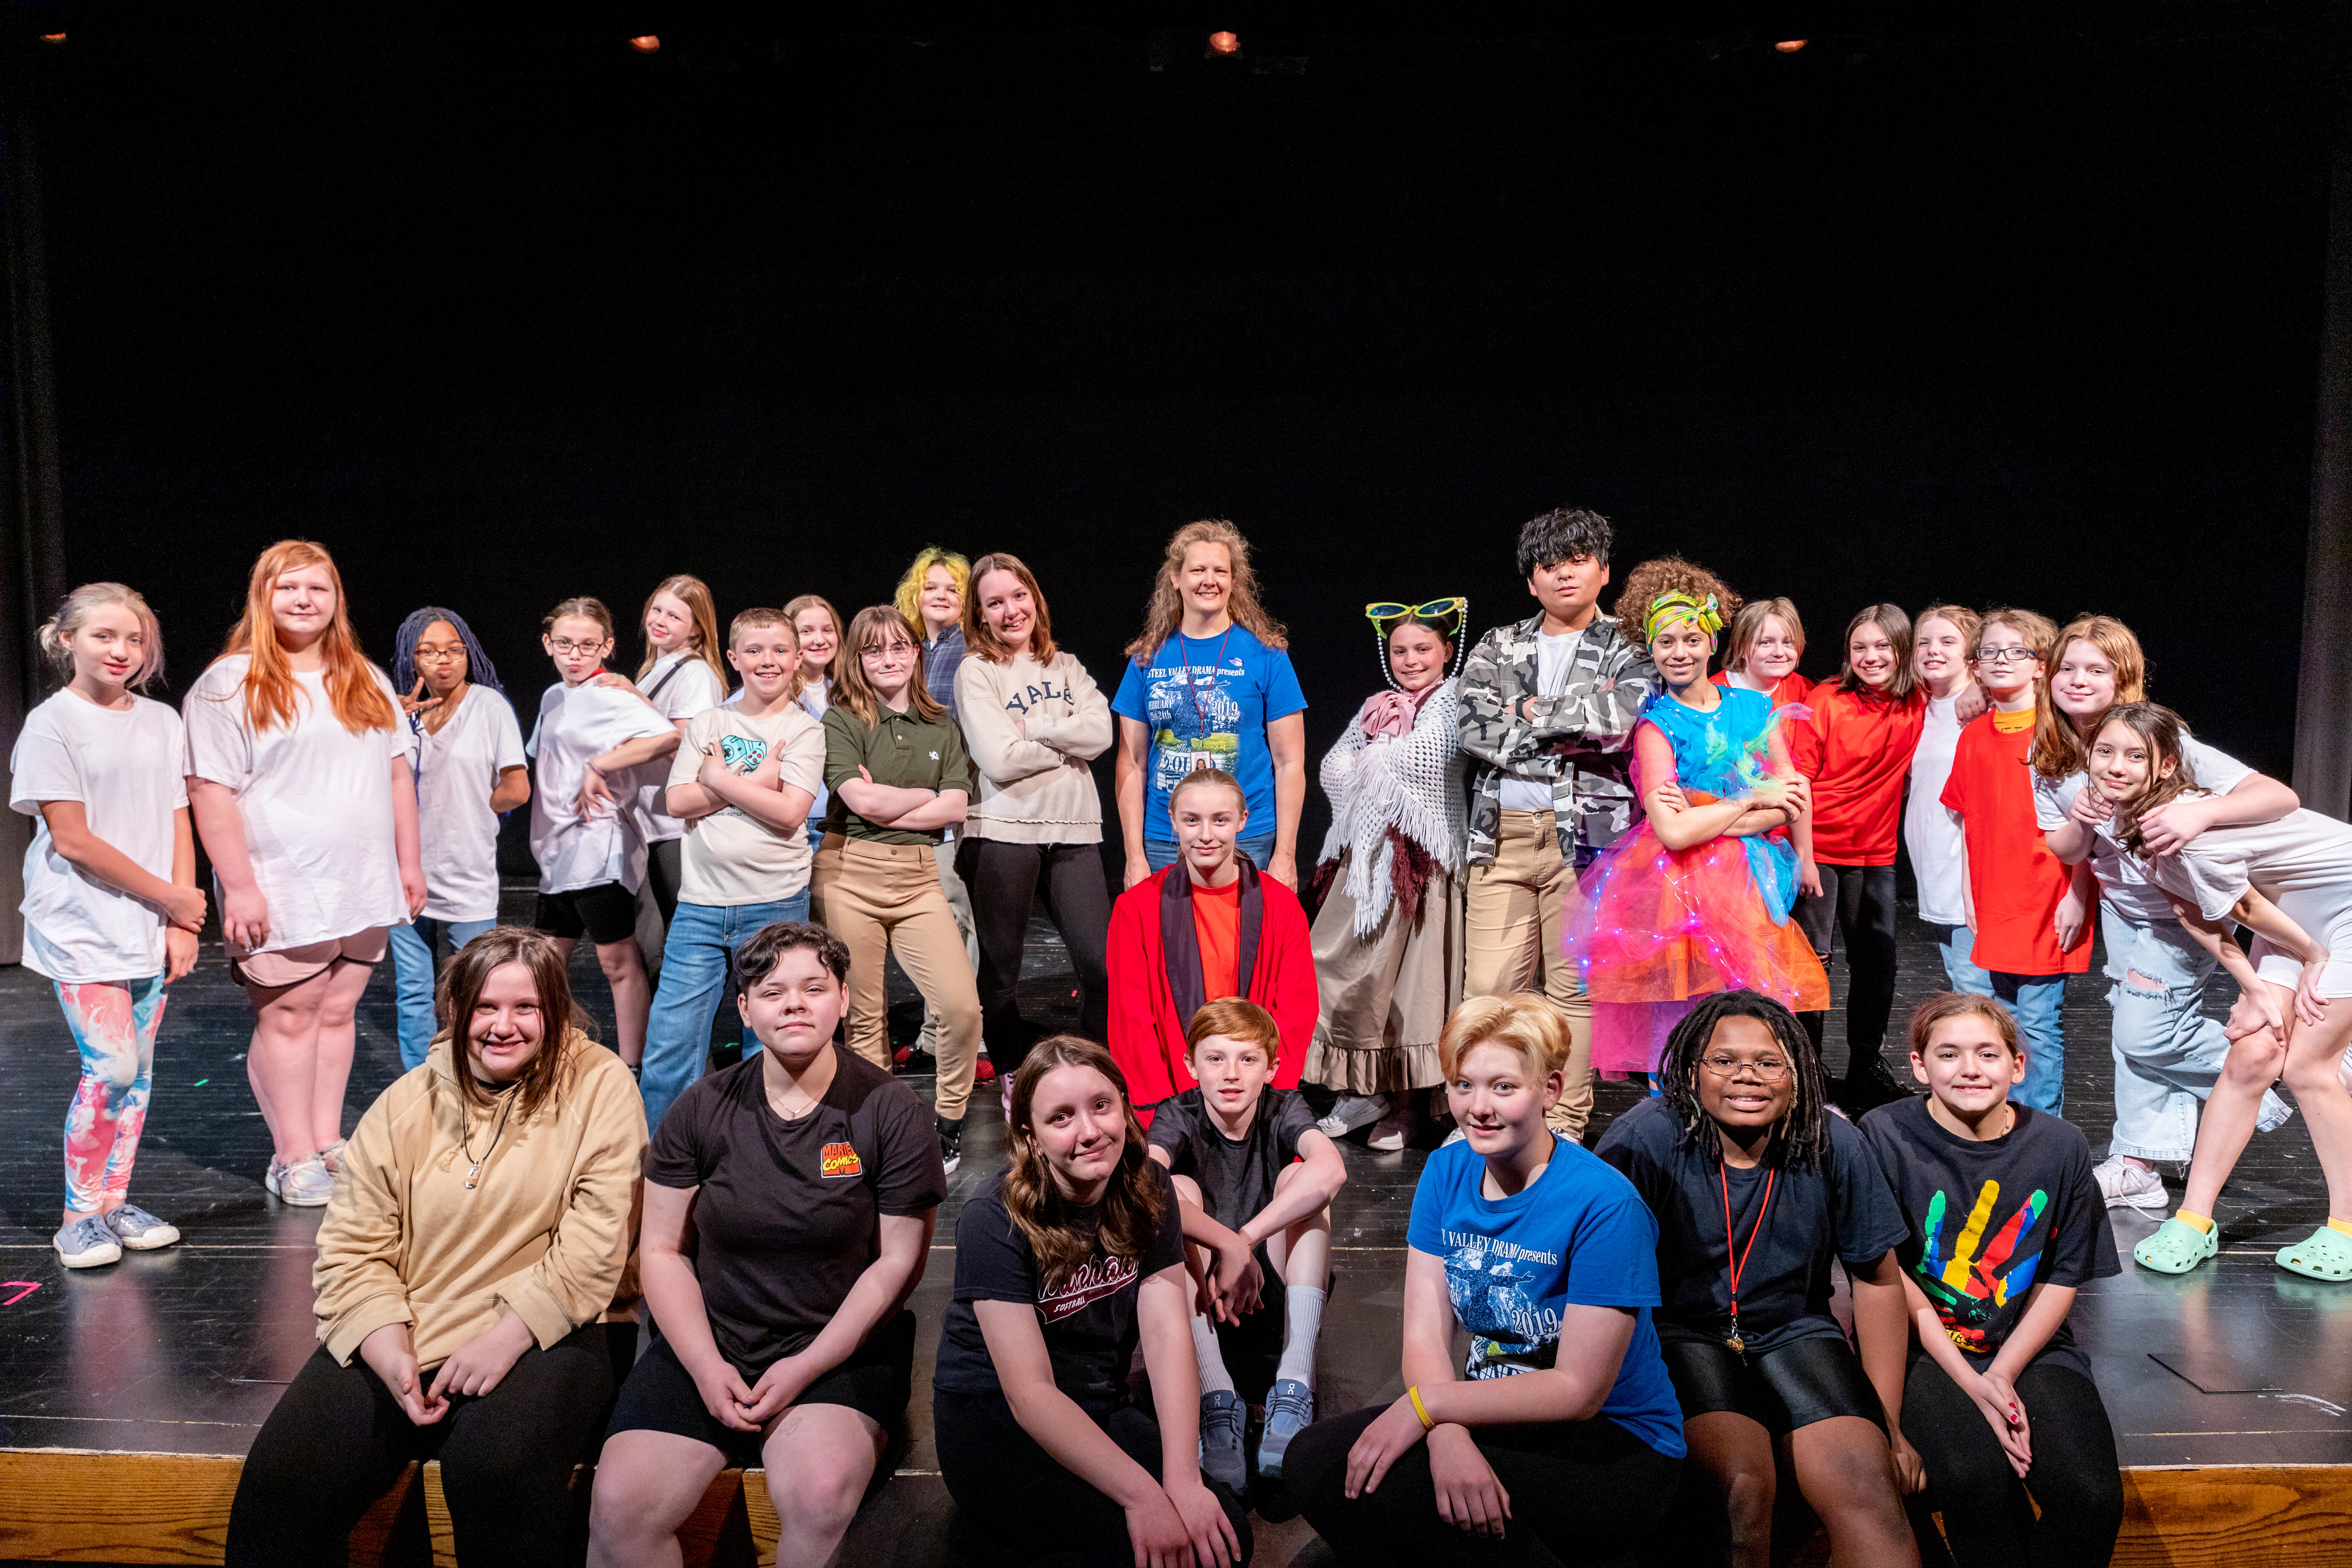 The cast and crew of the middle school show A Wrinkle in Time